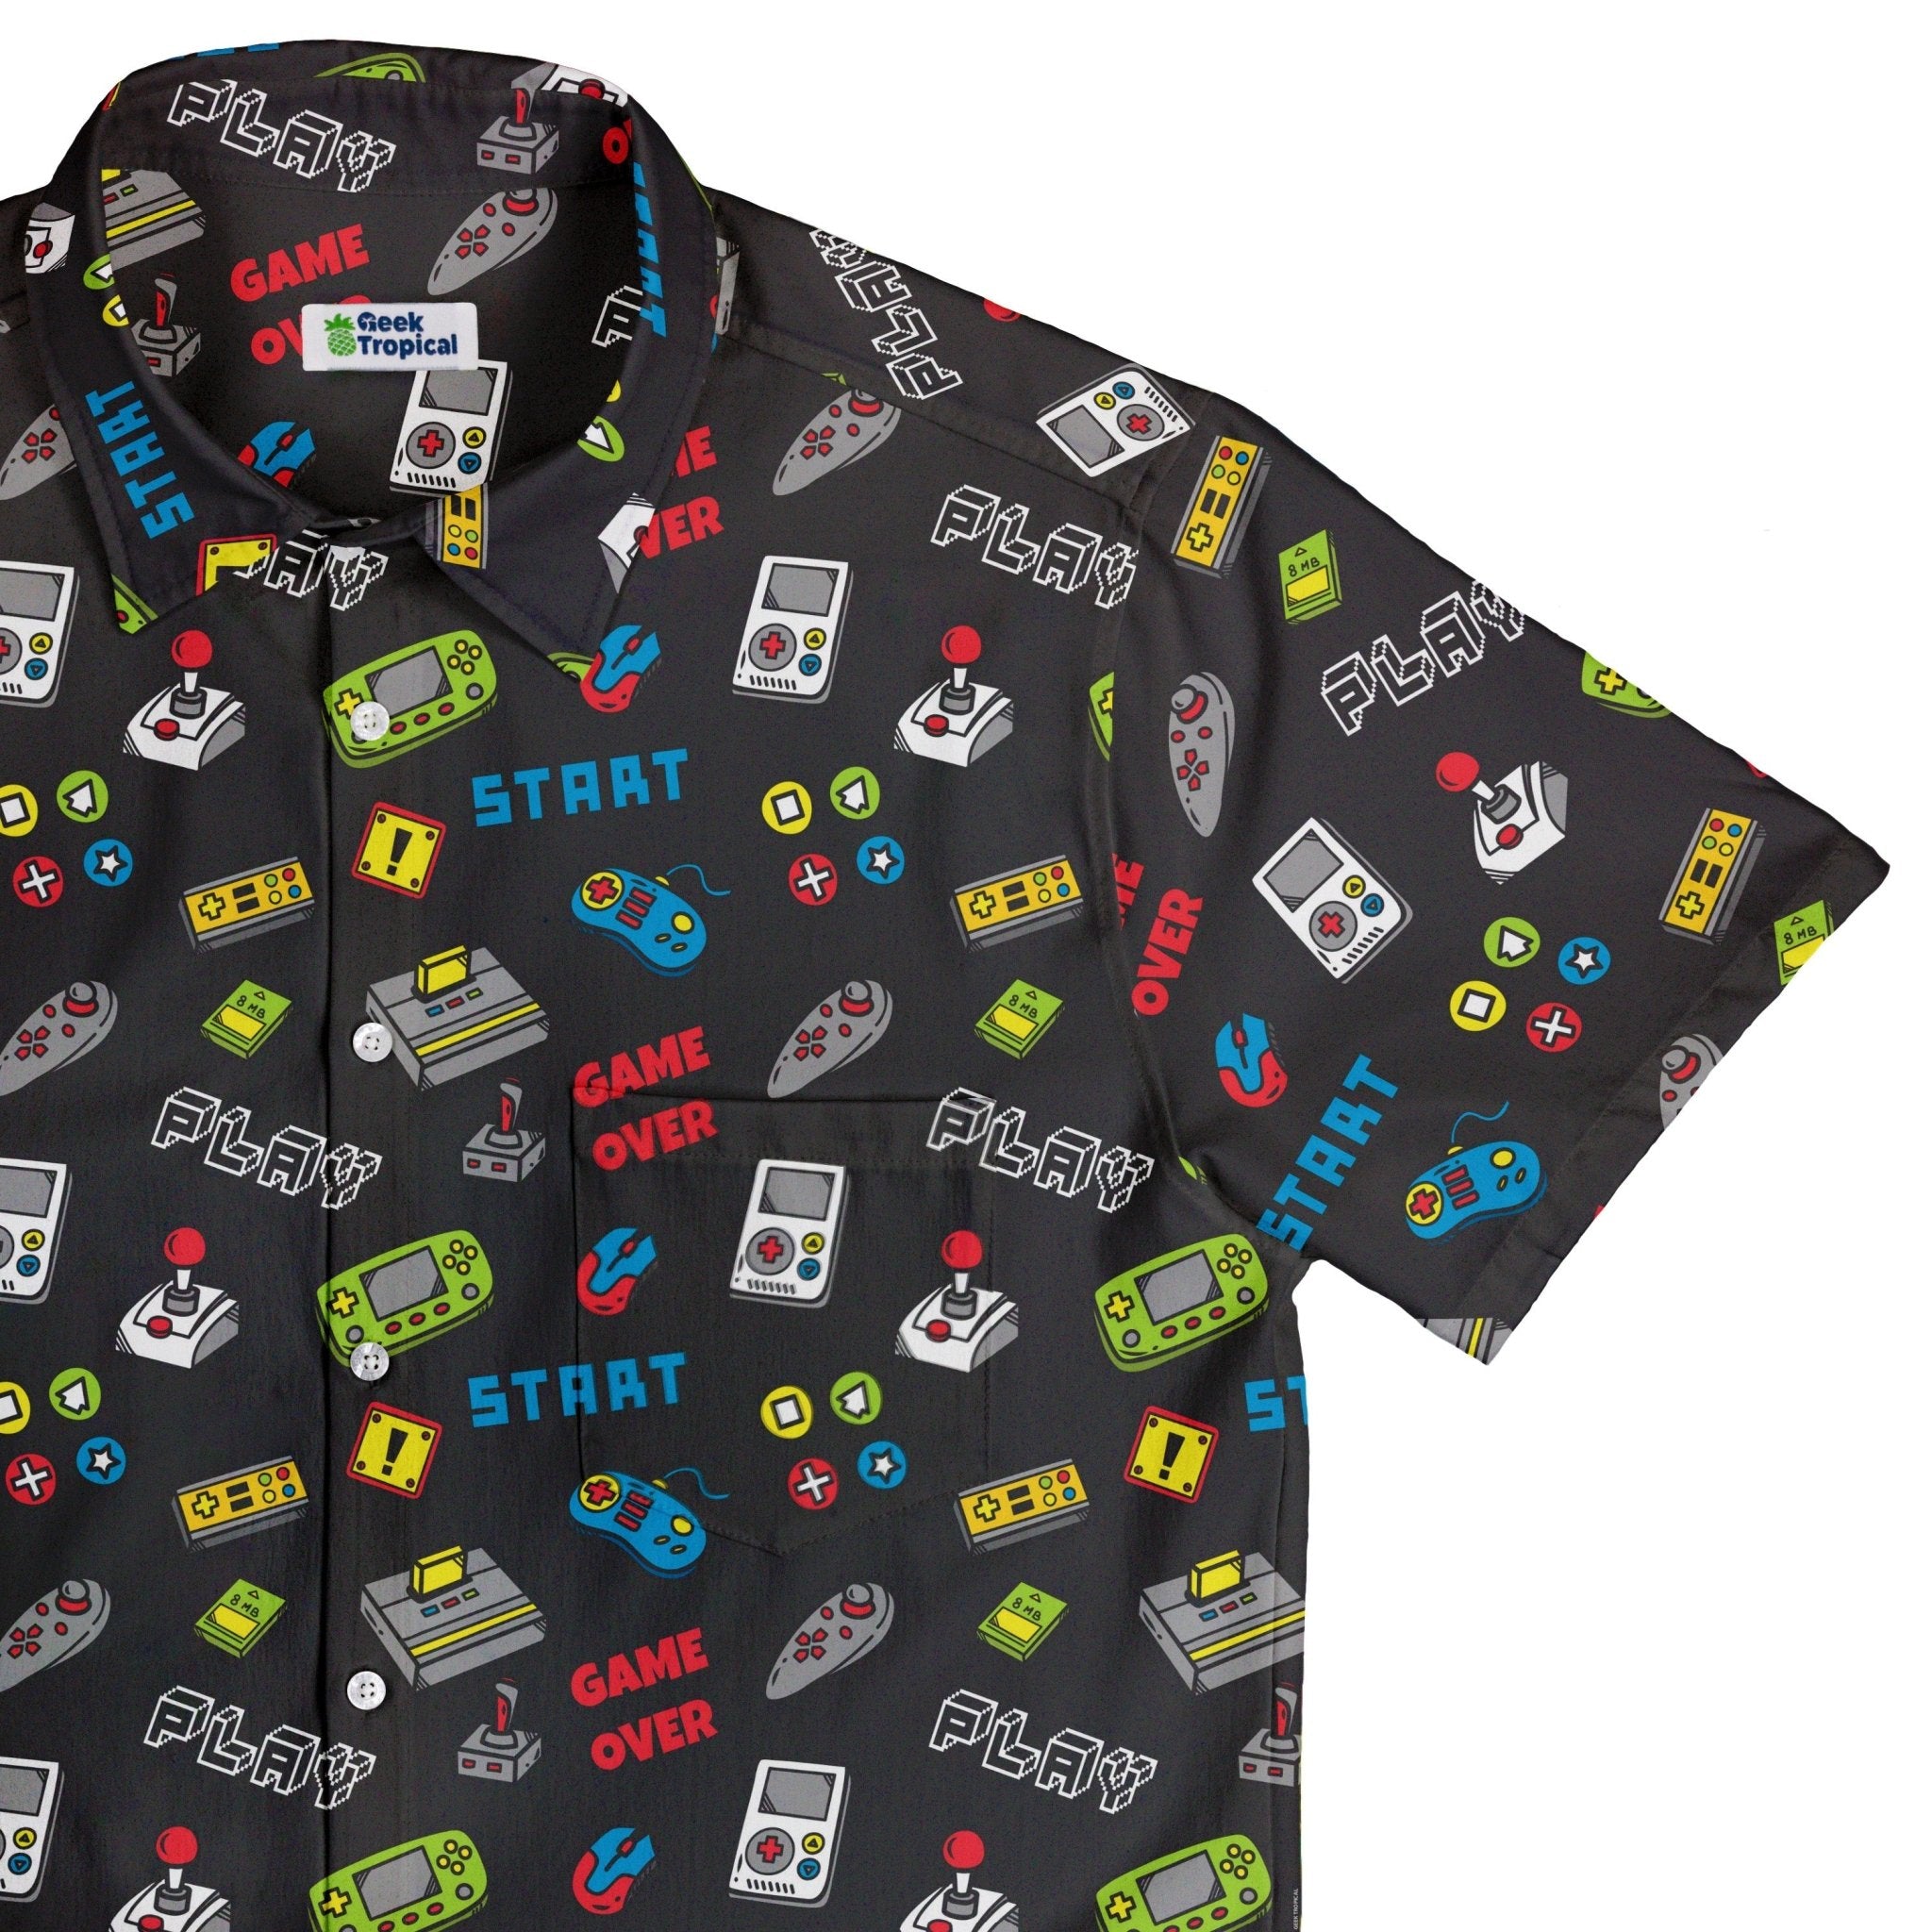 Video Gamer Black Video Game Button Up Shirt - adult sizing - video game arcade print -